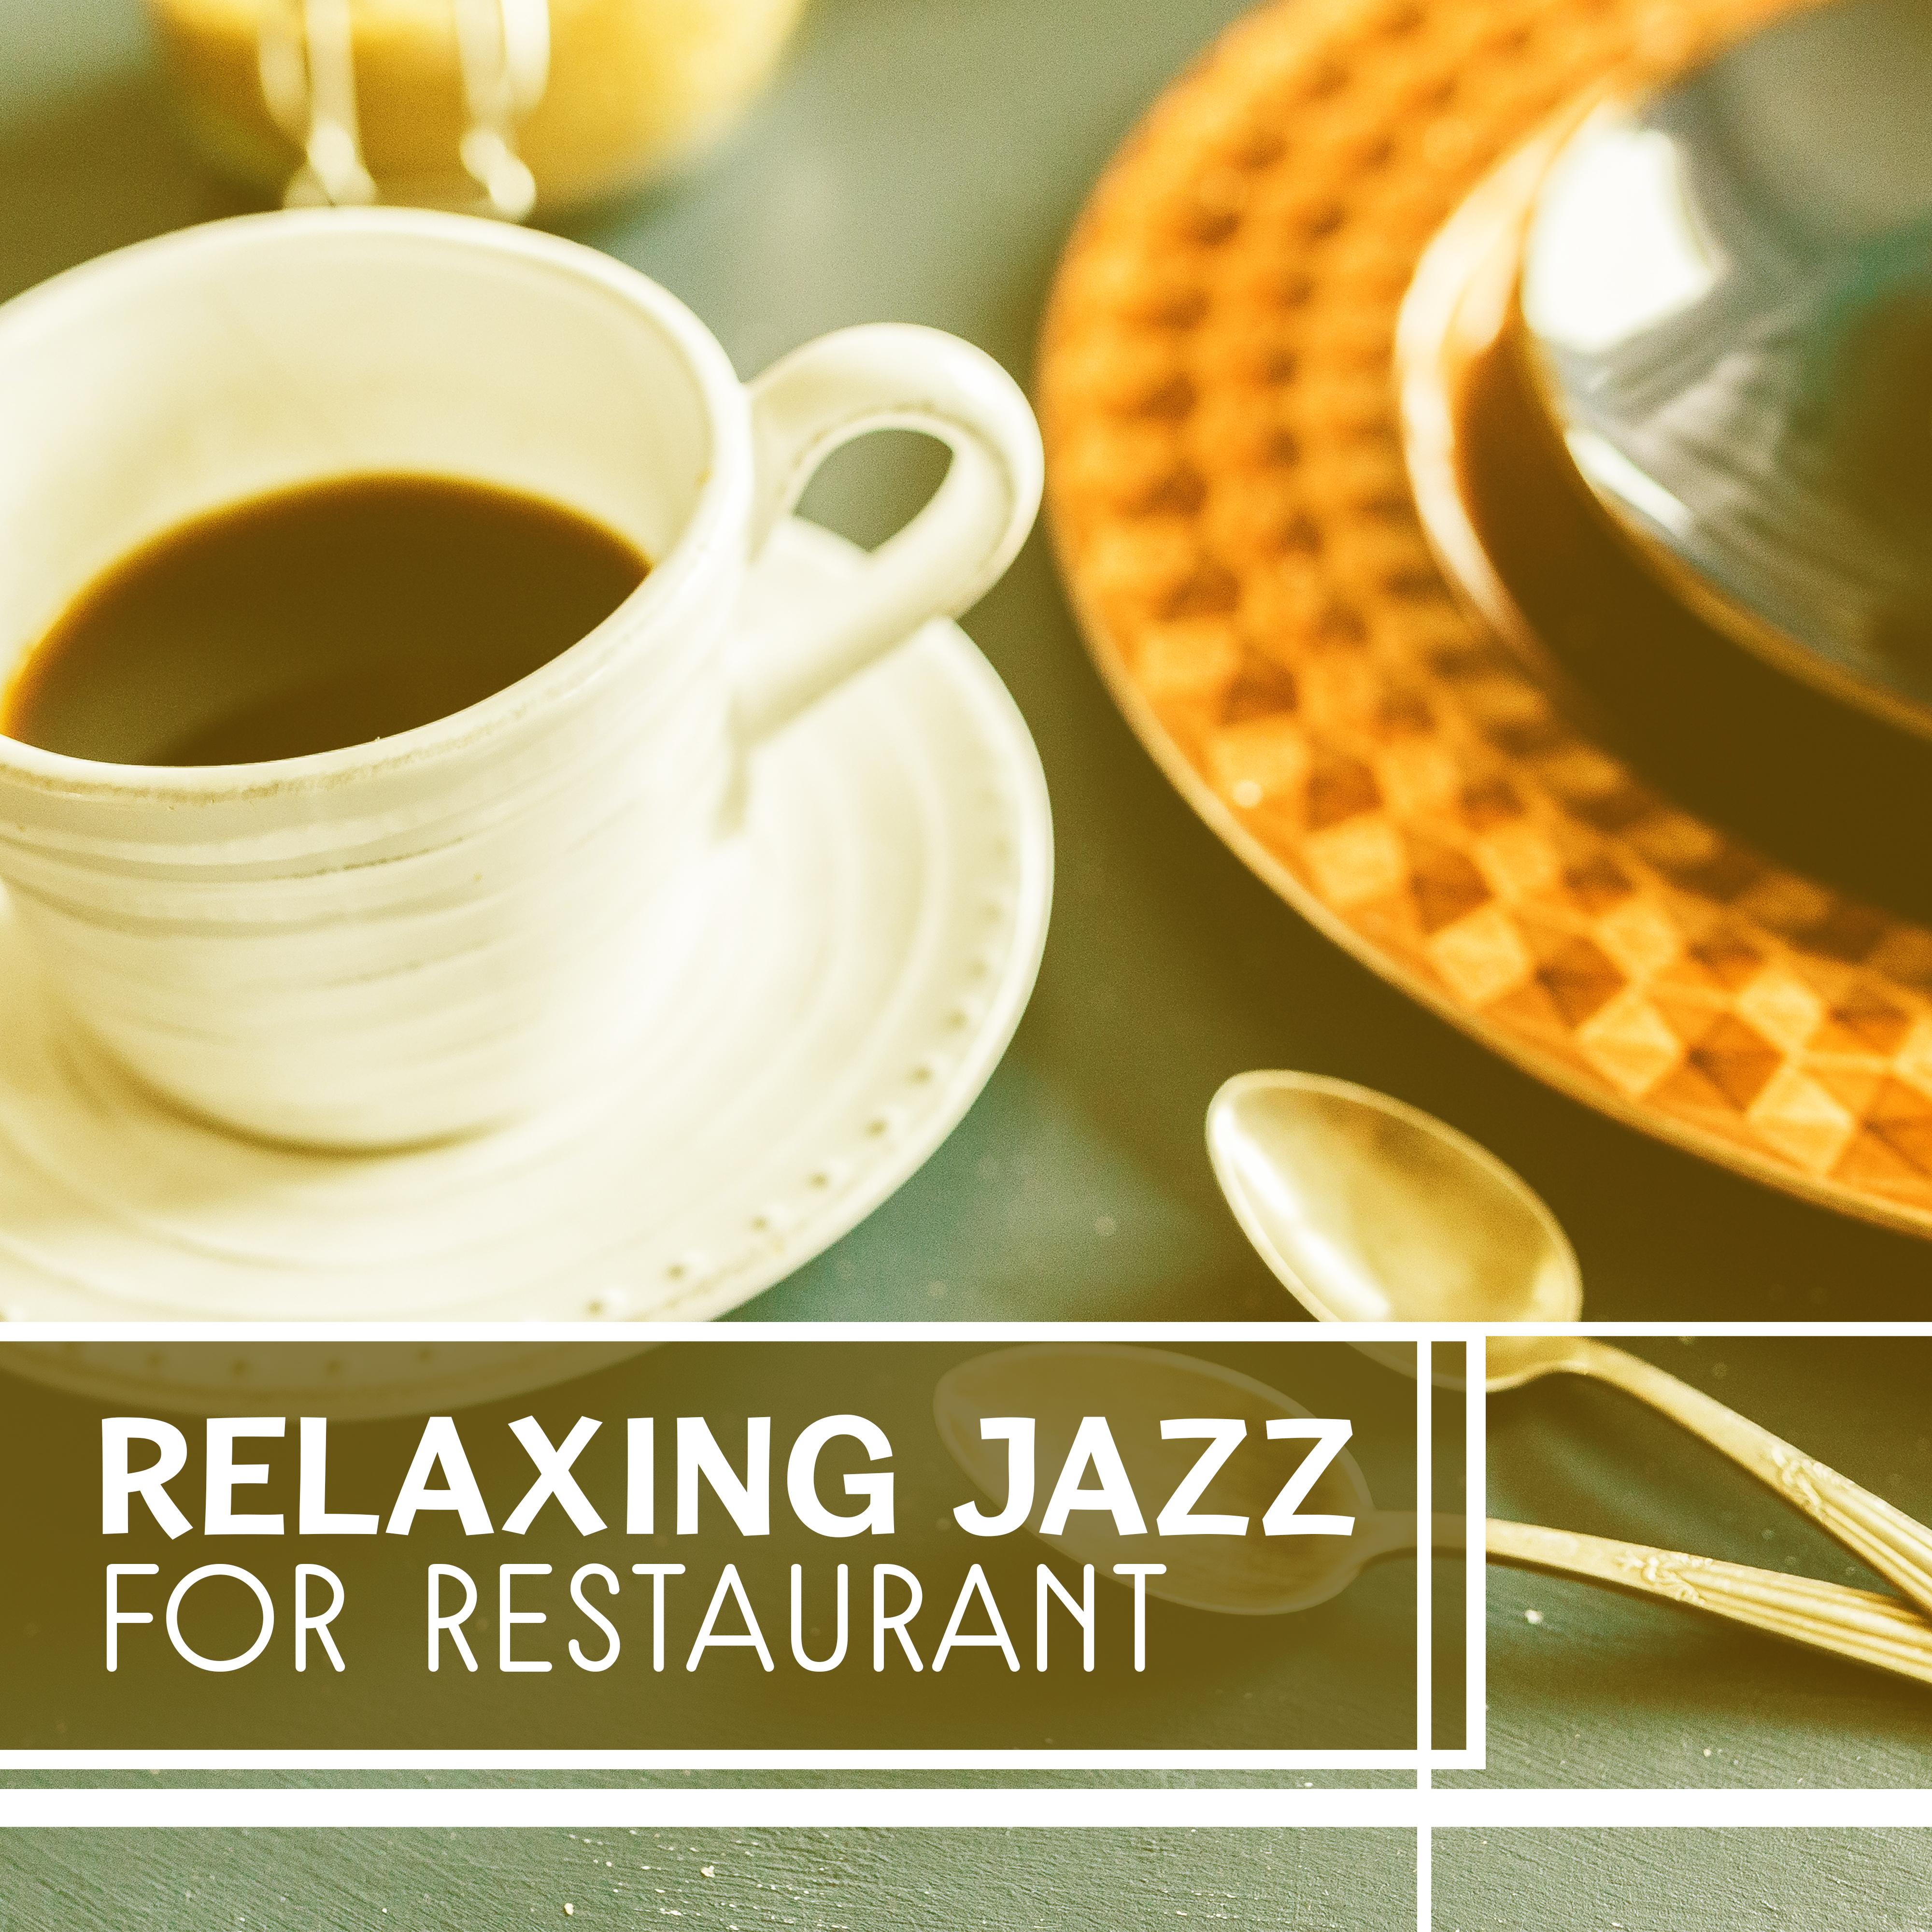 Relaxing Jazz for Restaurant – Smooth Jazz Sounds, Rest with Jazz, Calmness Piano Jazz, Easy Listening